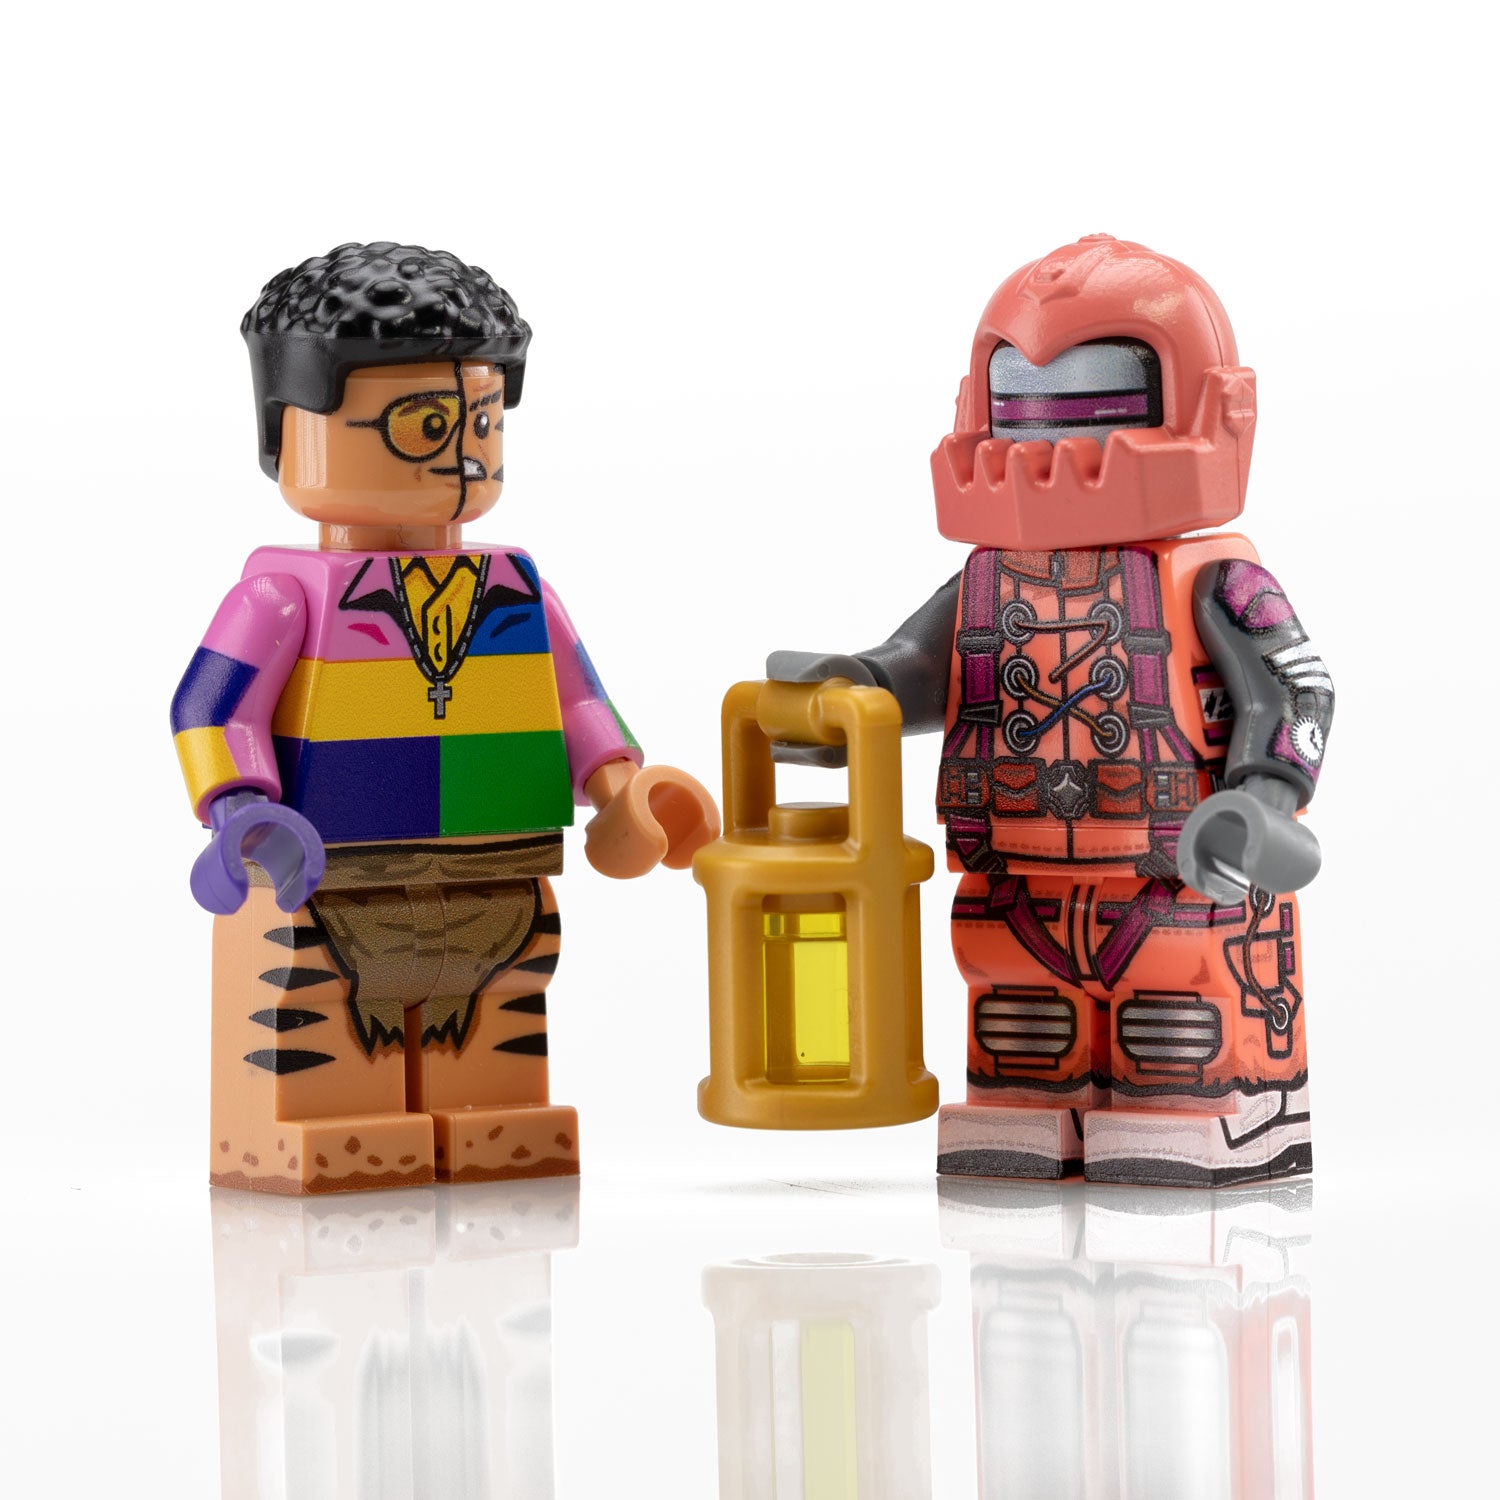 Custom Printed Lego - MinifigsMonthly™ MarchLeftovers - The Minifig Co.